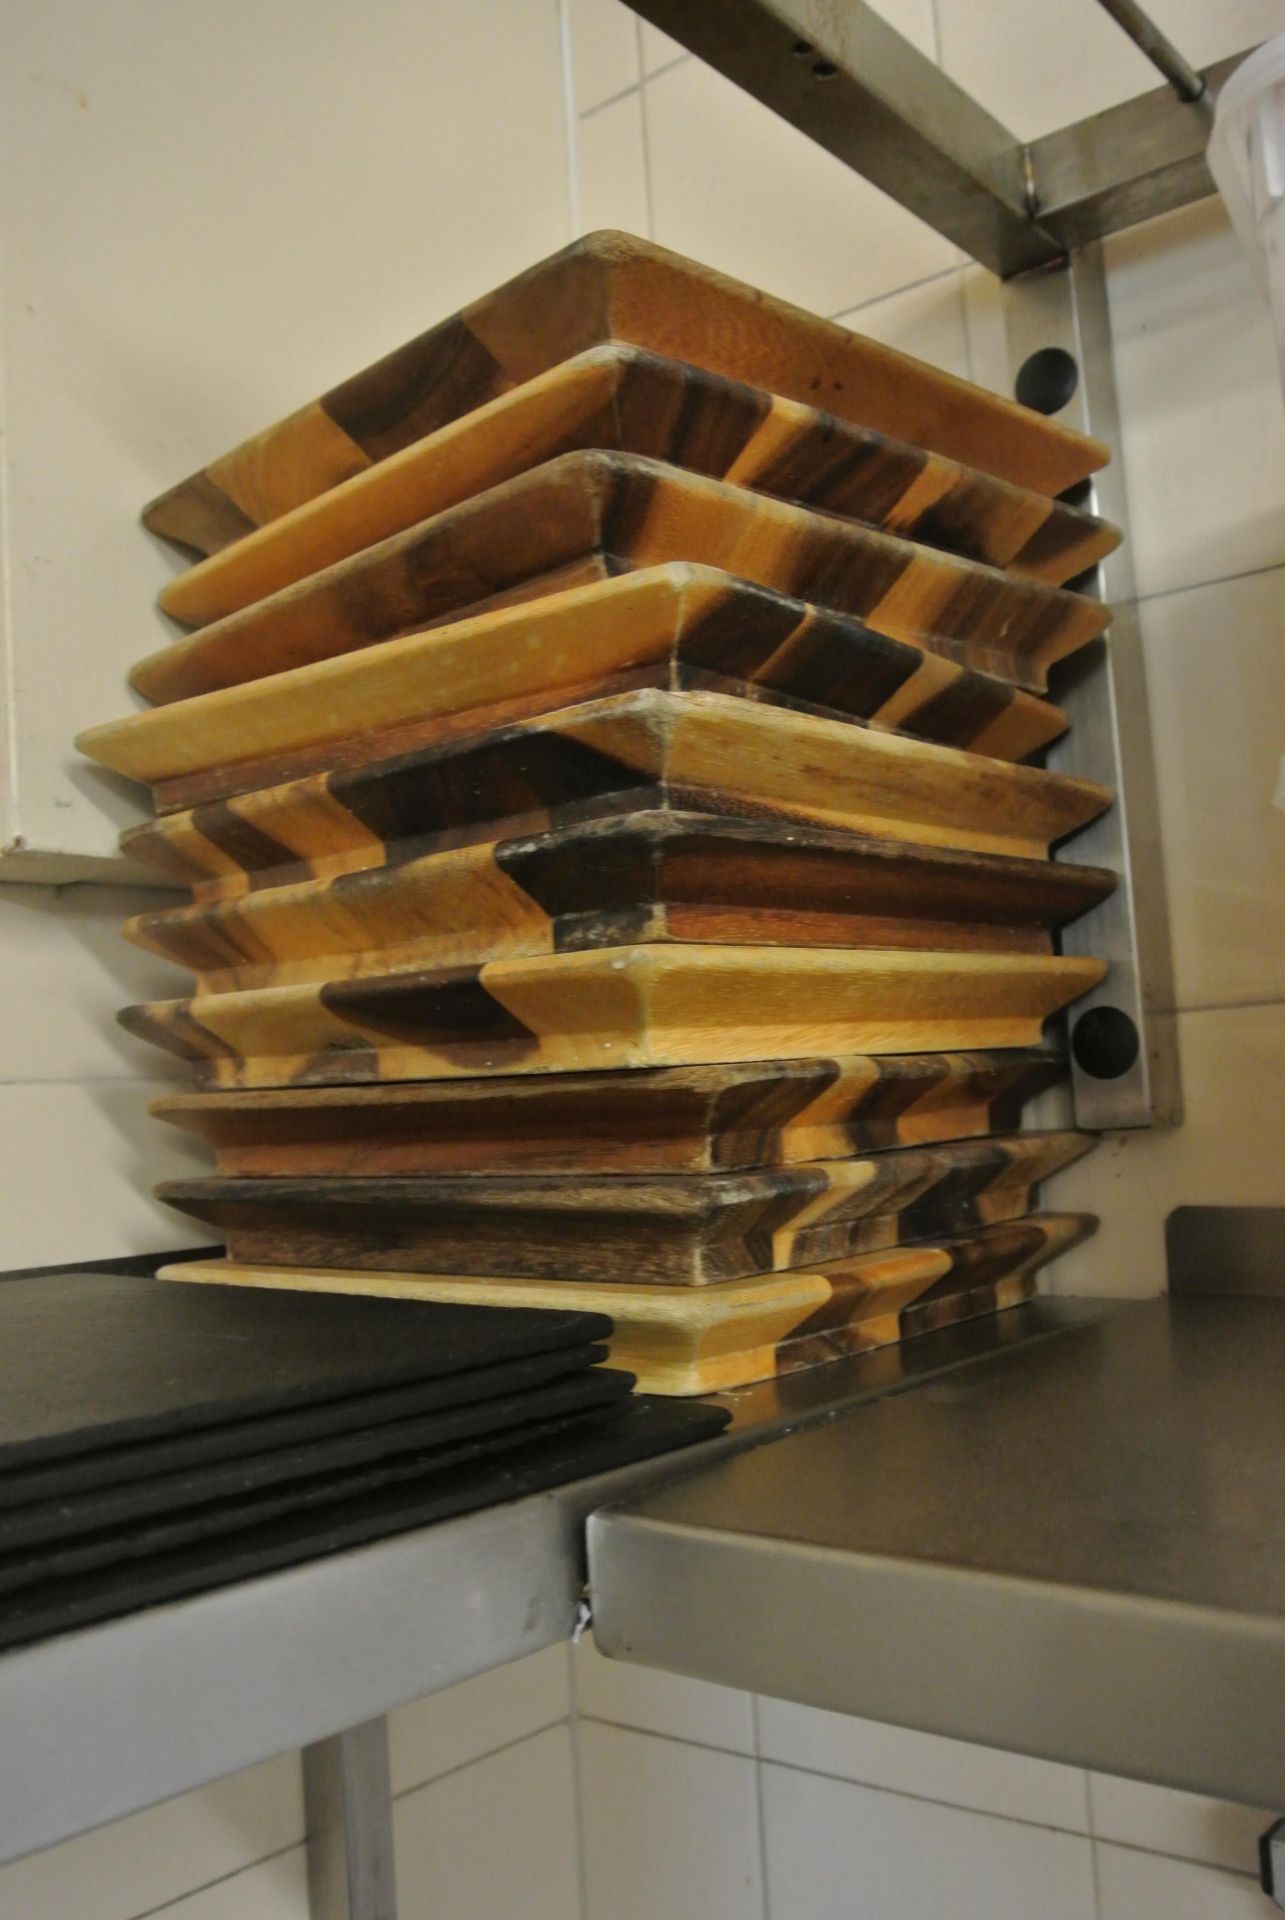 Wooden Serving Boards - Image 2 of 2